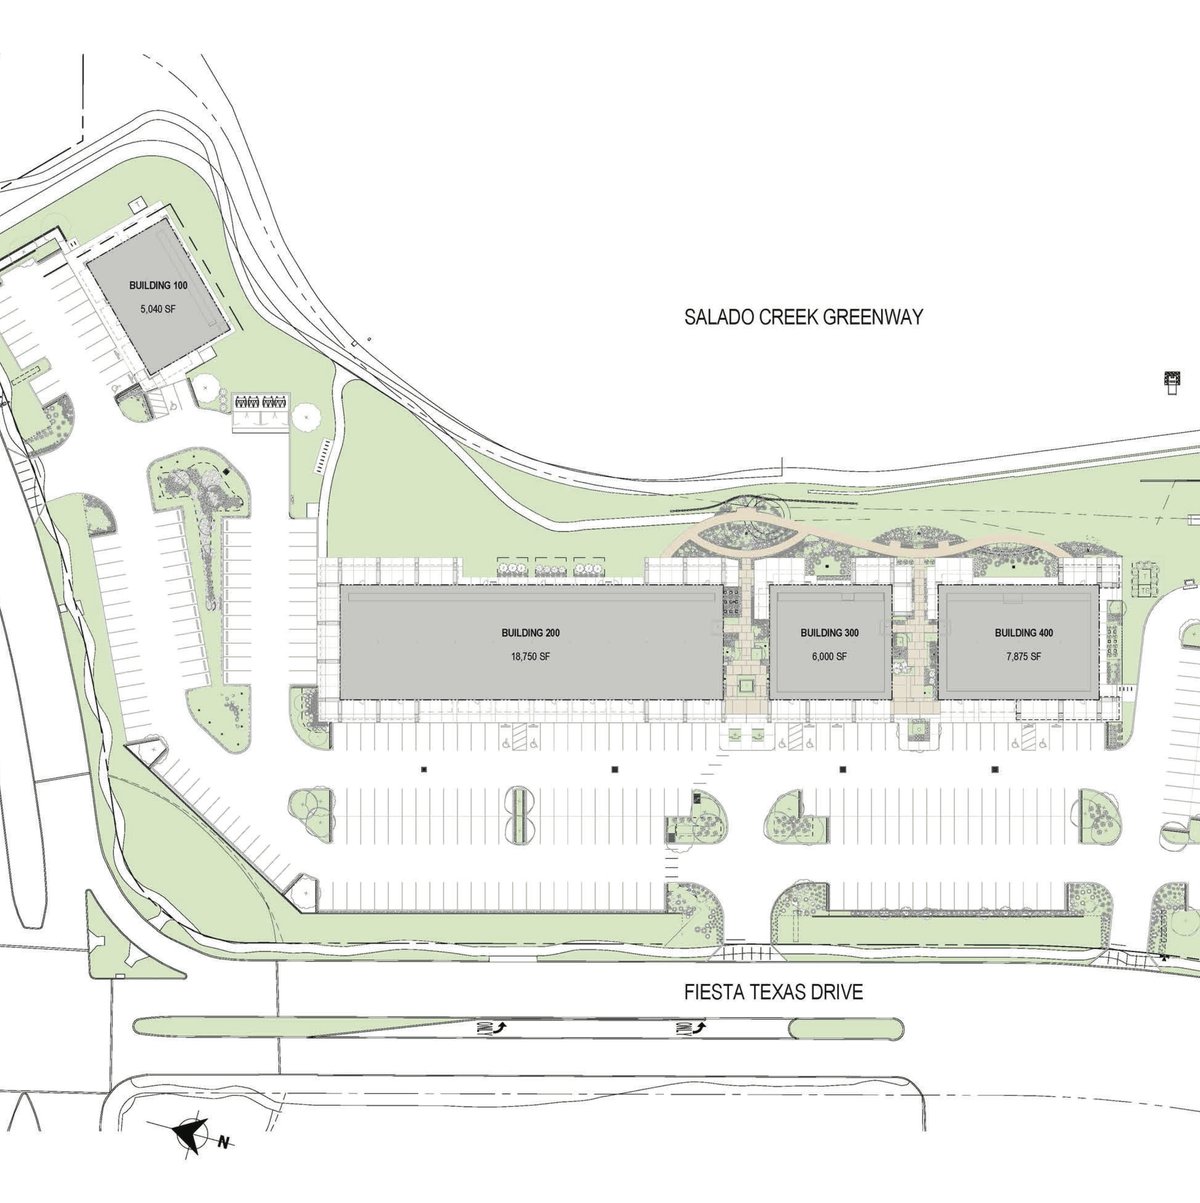 34 acres of new retail planned near The Shops at La Cantera, The